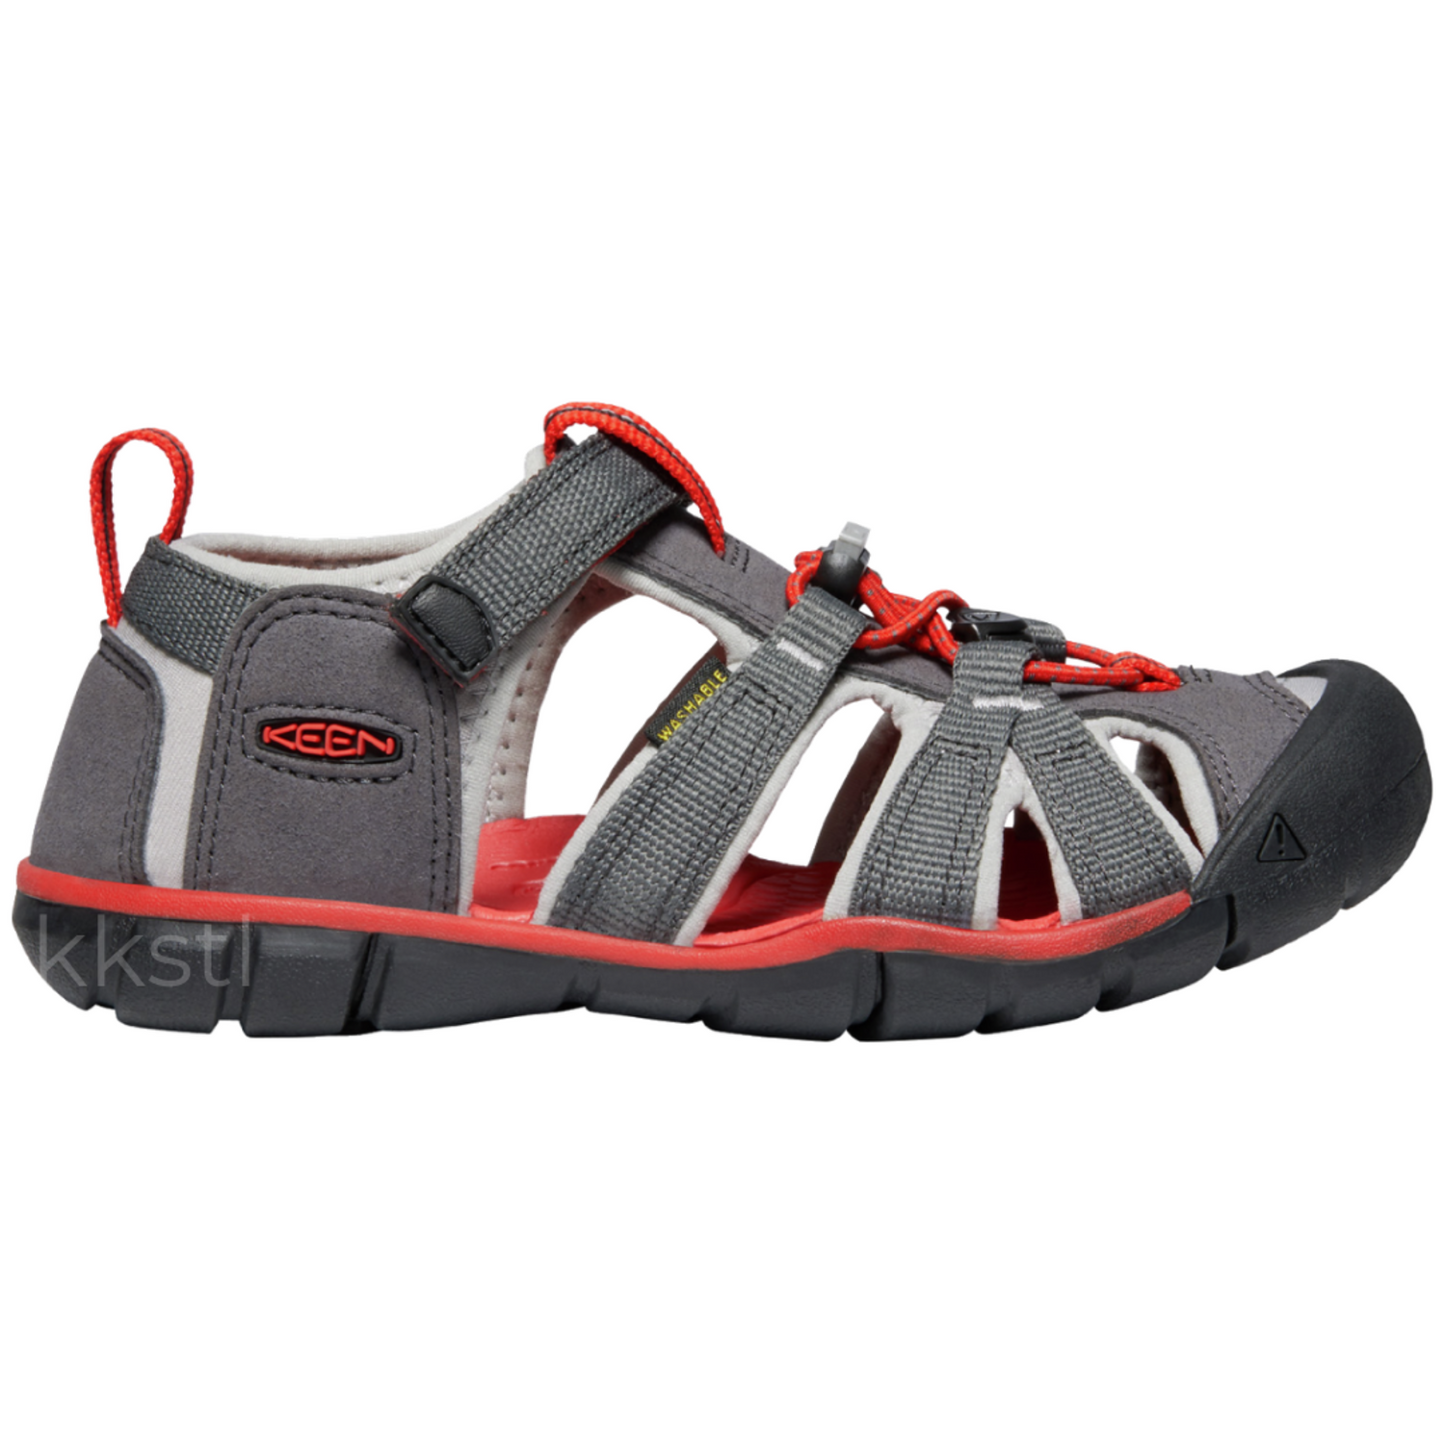 The supportive Keen Newport H2 sandal can take anything a kid can dish out. An adjustable hook-and-loop strap lets kids put them on themselves, and quick-drying webbing is perfect in and out of the water.  Hook and loop strap over instep PFC-Free materials Secure fit lace capture system All KEEN water sandals are machine washable. Use a small amount of detergent, wash on gentle cycle and air dry.